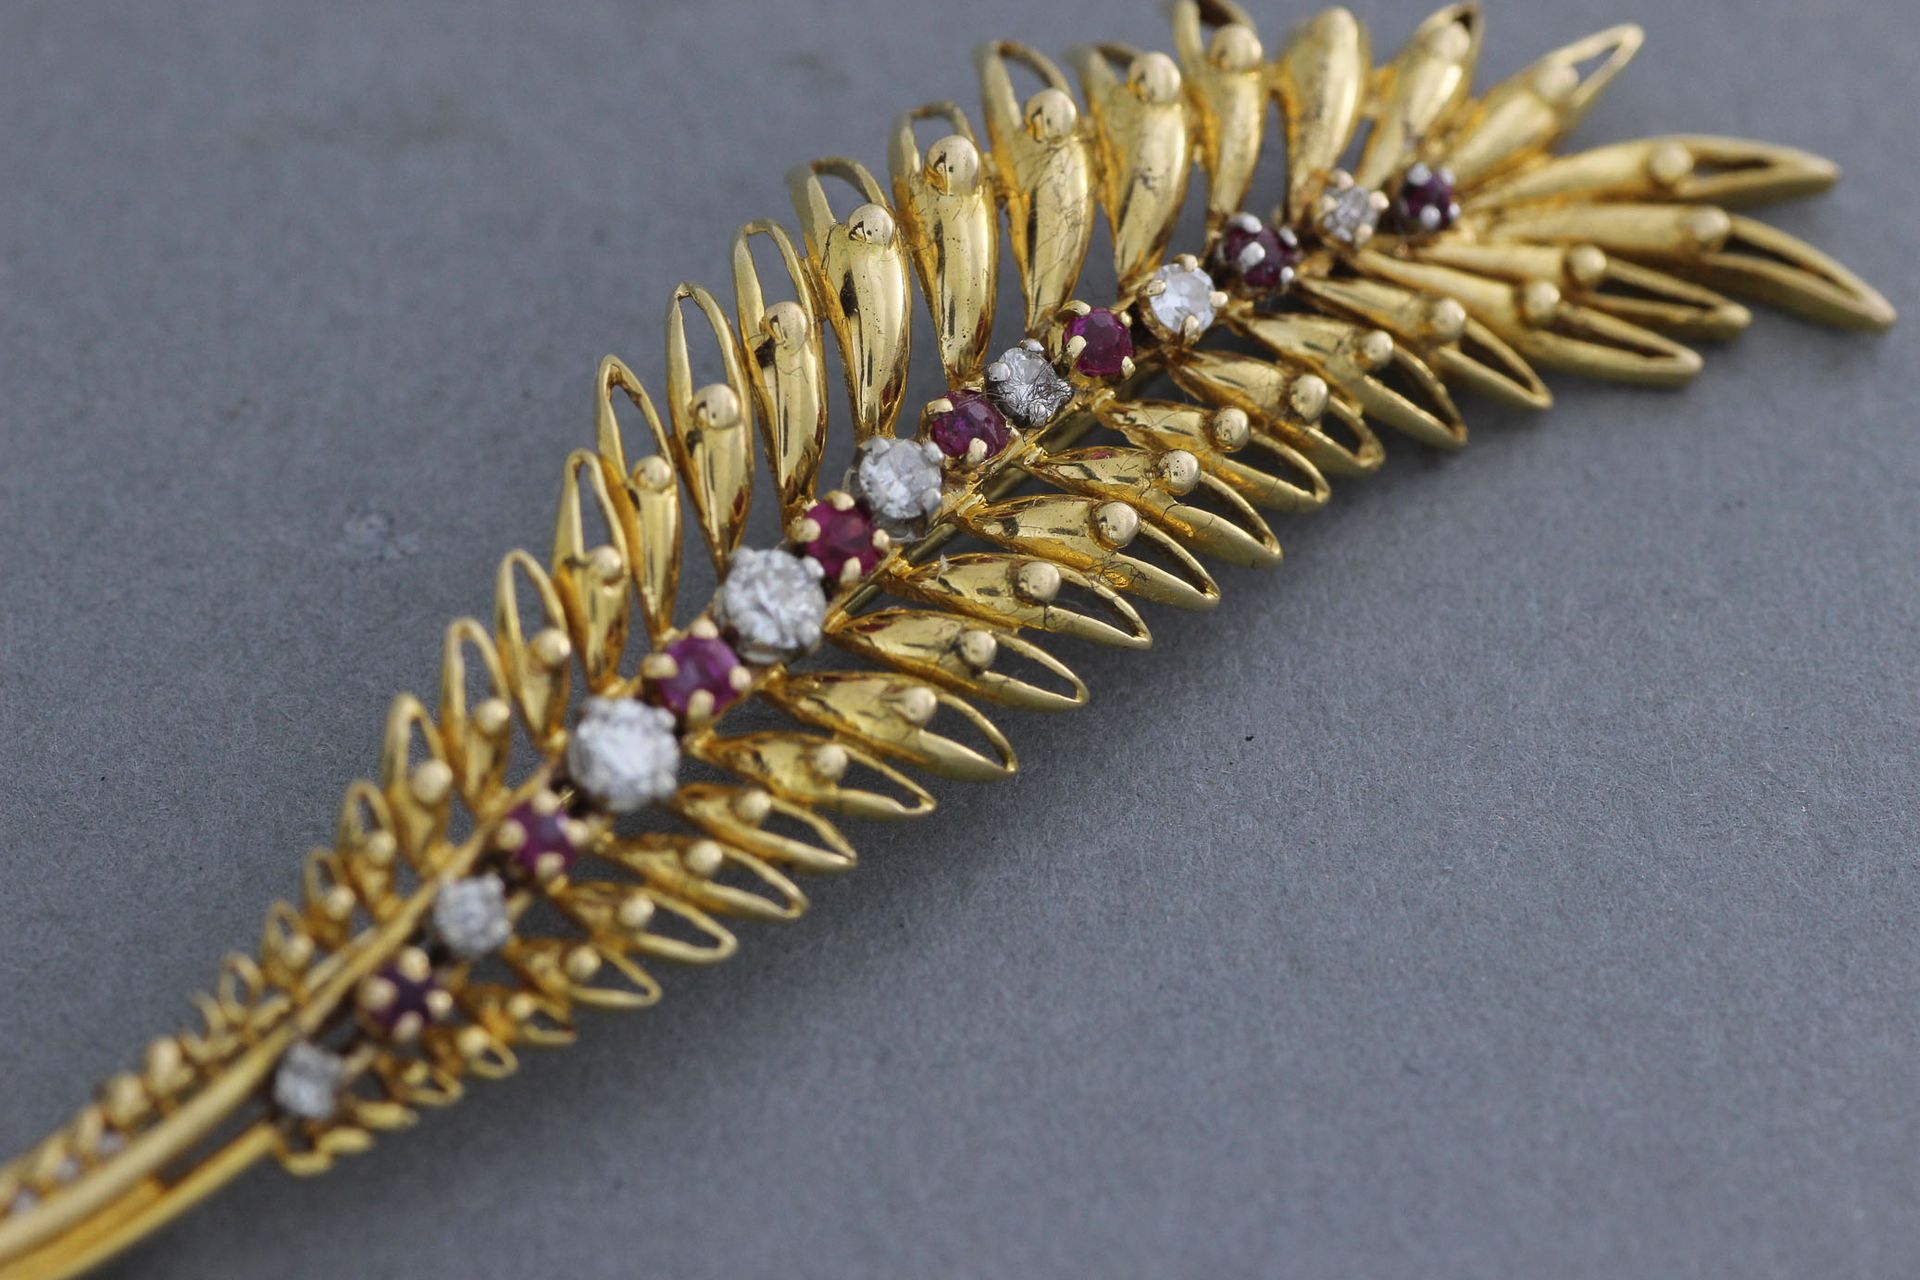 Null Gold "leaf" brooch with rubies and diamonds - Gross weight: 8.6 g